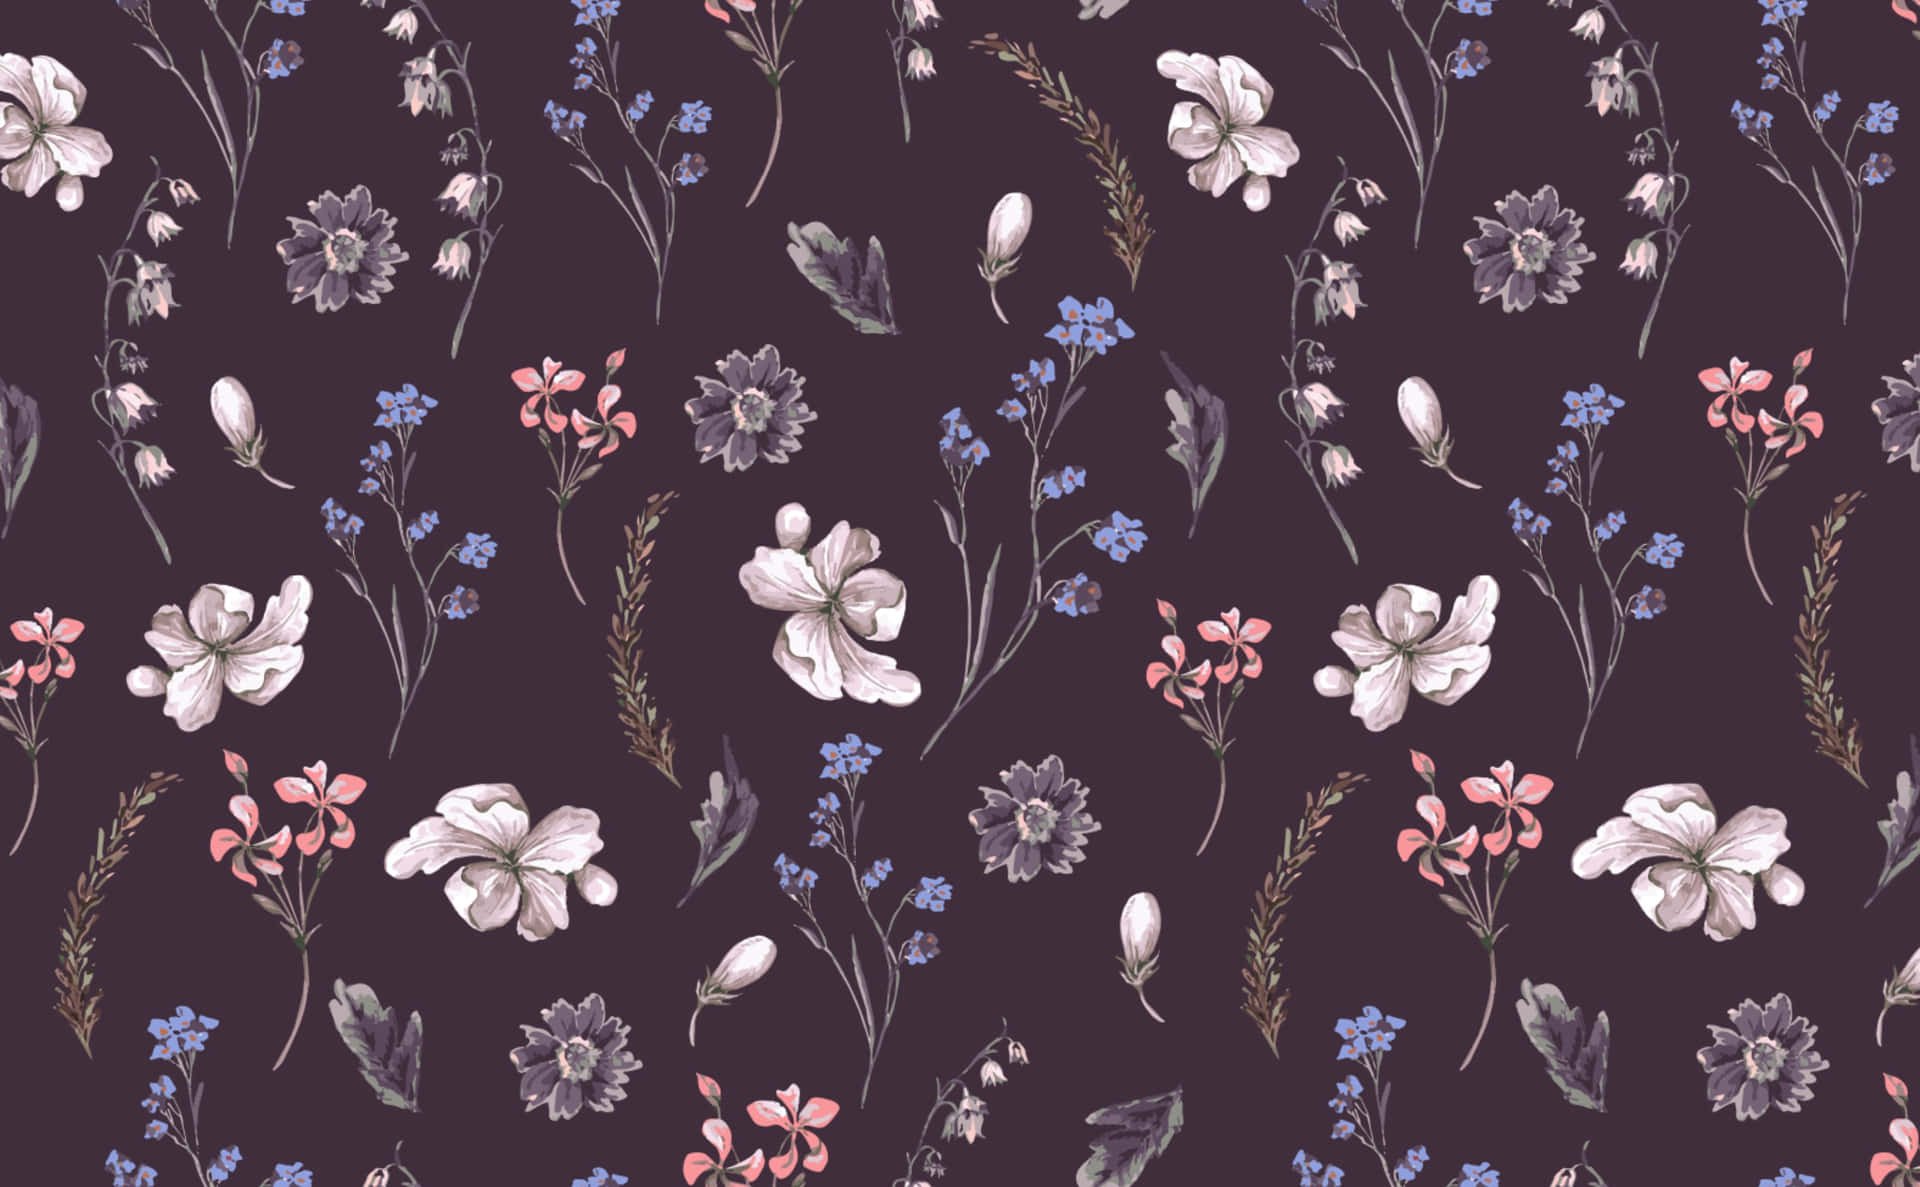 Step Back in Time with this Vintage Floral Background